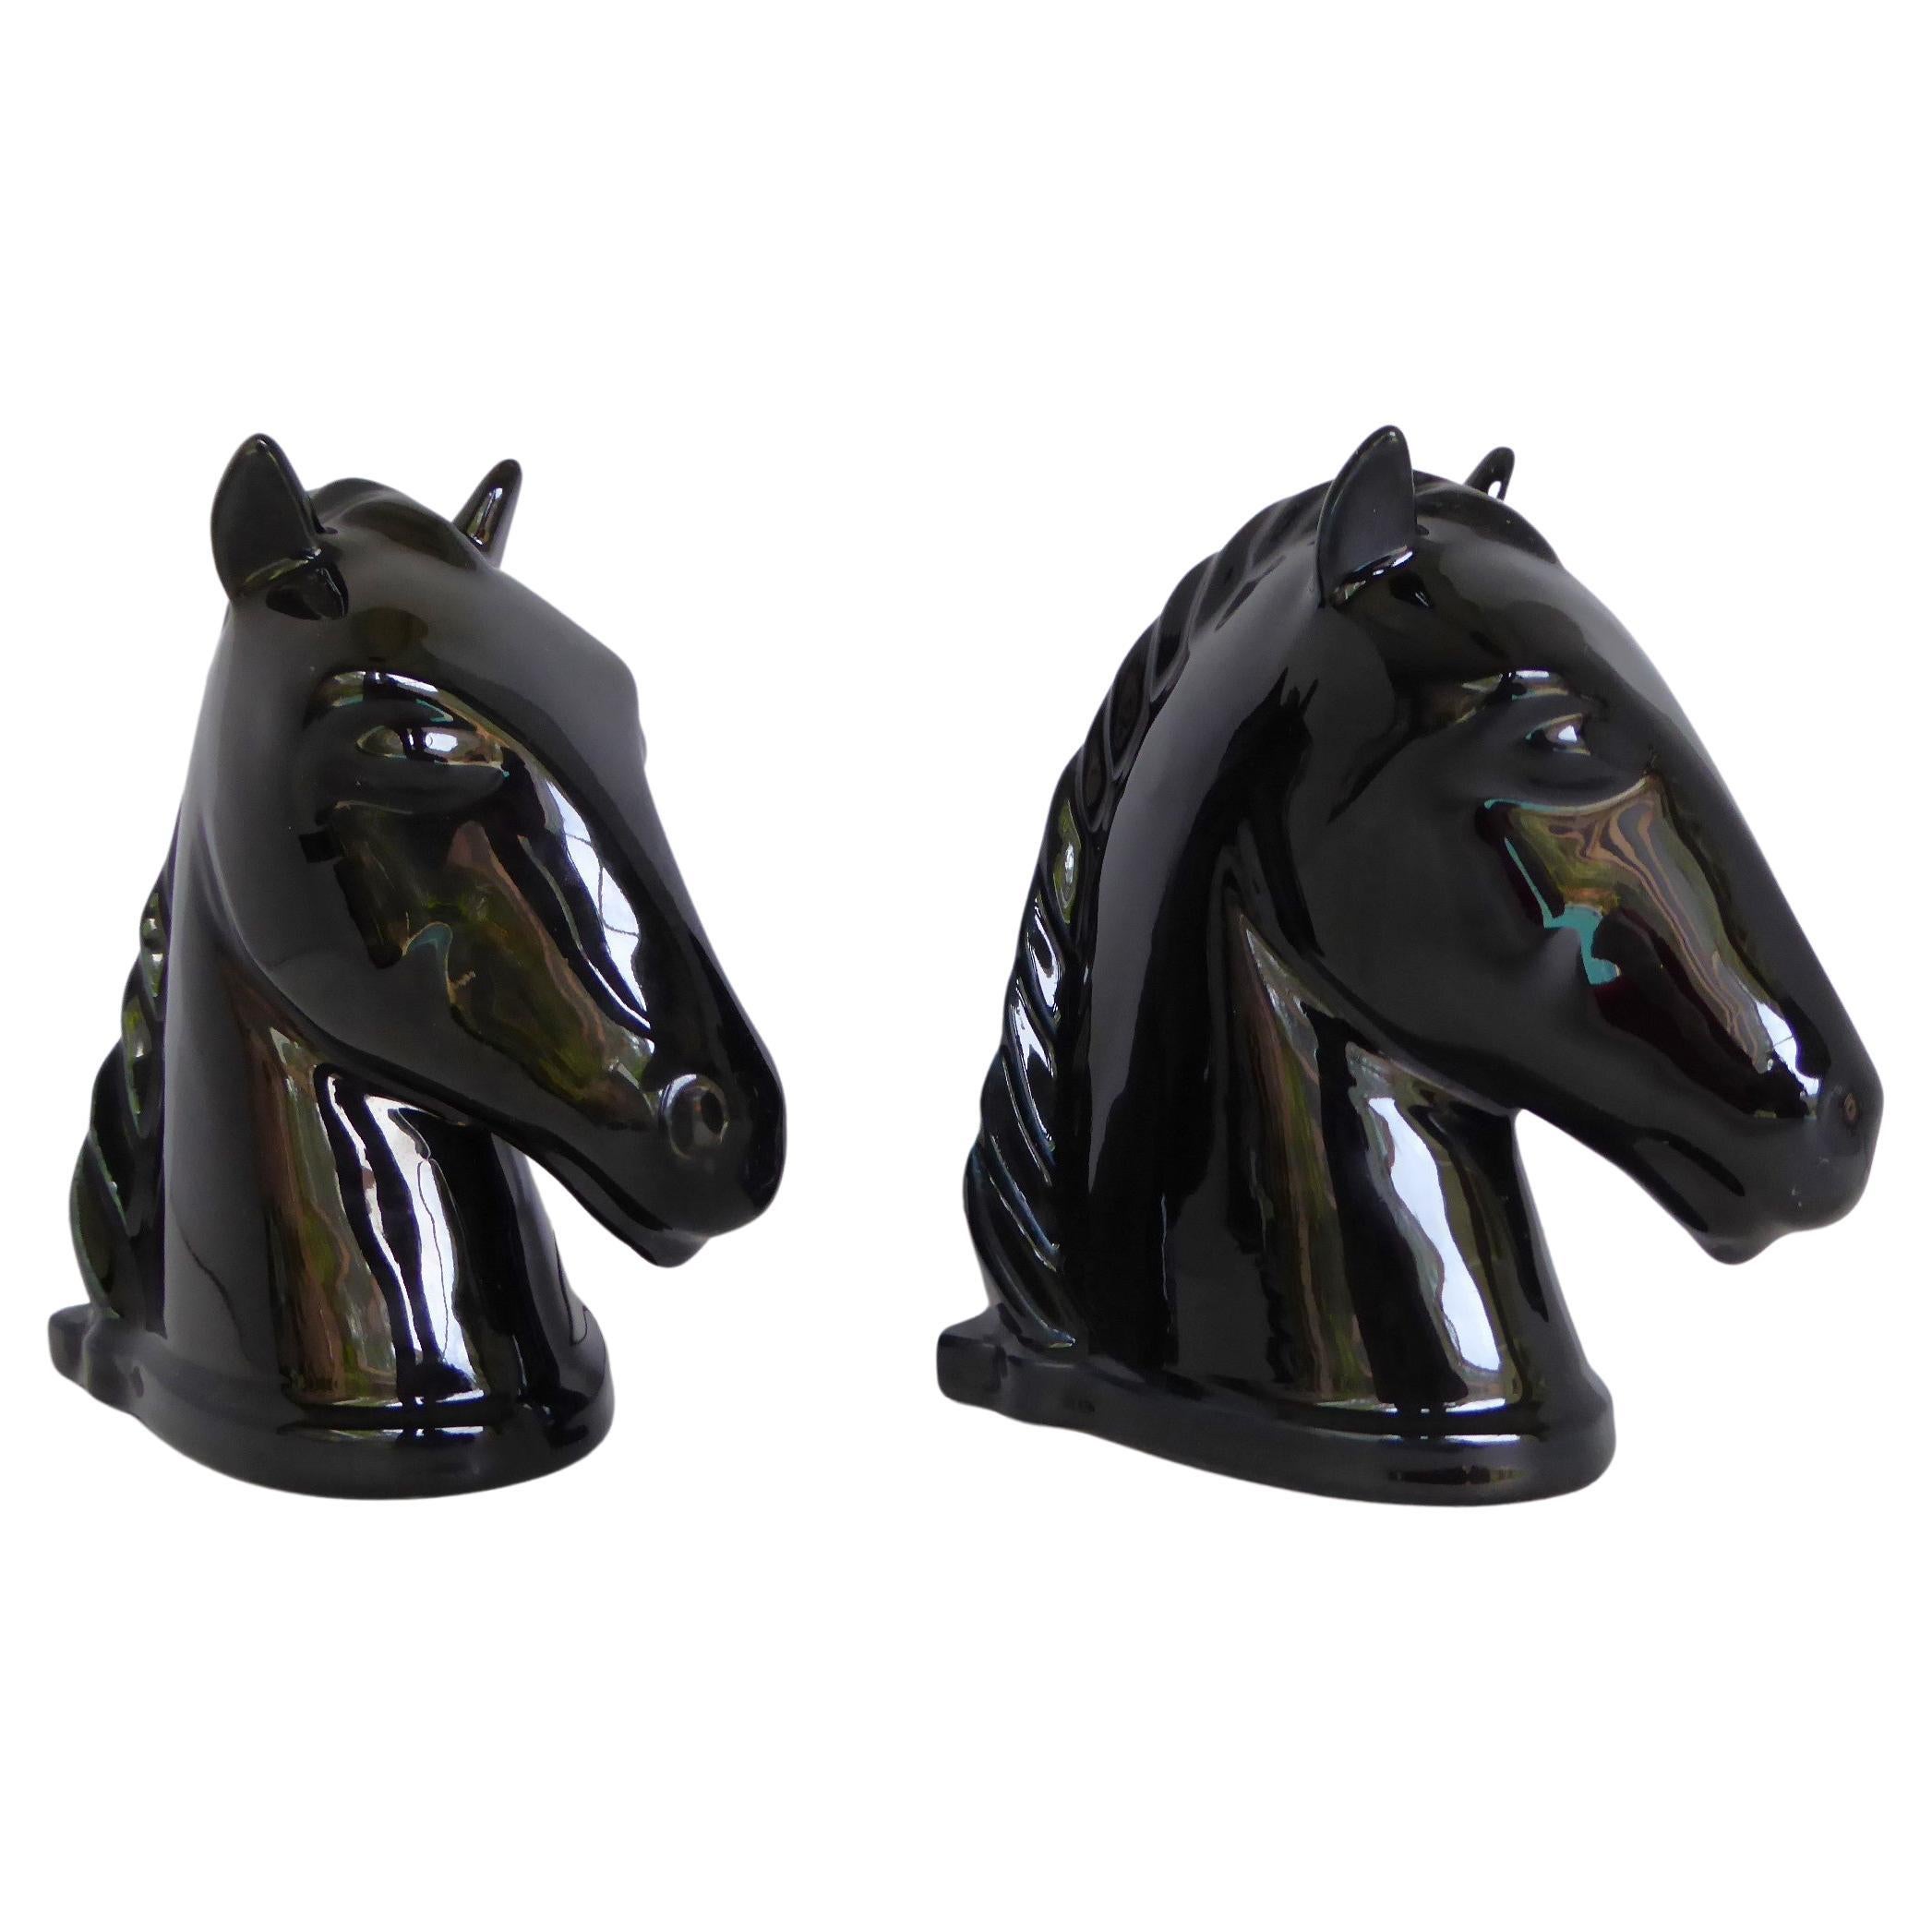 Handsome Pair of Mid Century Horse Head Modern Bookends by Abingdon Potteries.   Beautiful designed horse heads bookends in glossy black glaze which were produced from 1938 through 1950. Stamped on bottom in ink with the ABINGDON USA  in a rectangle